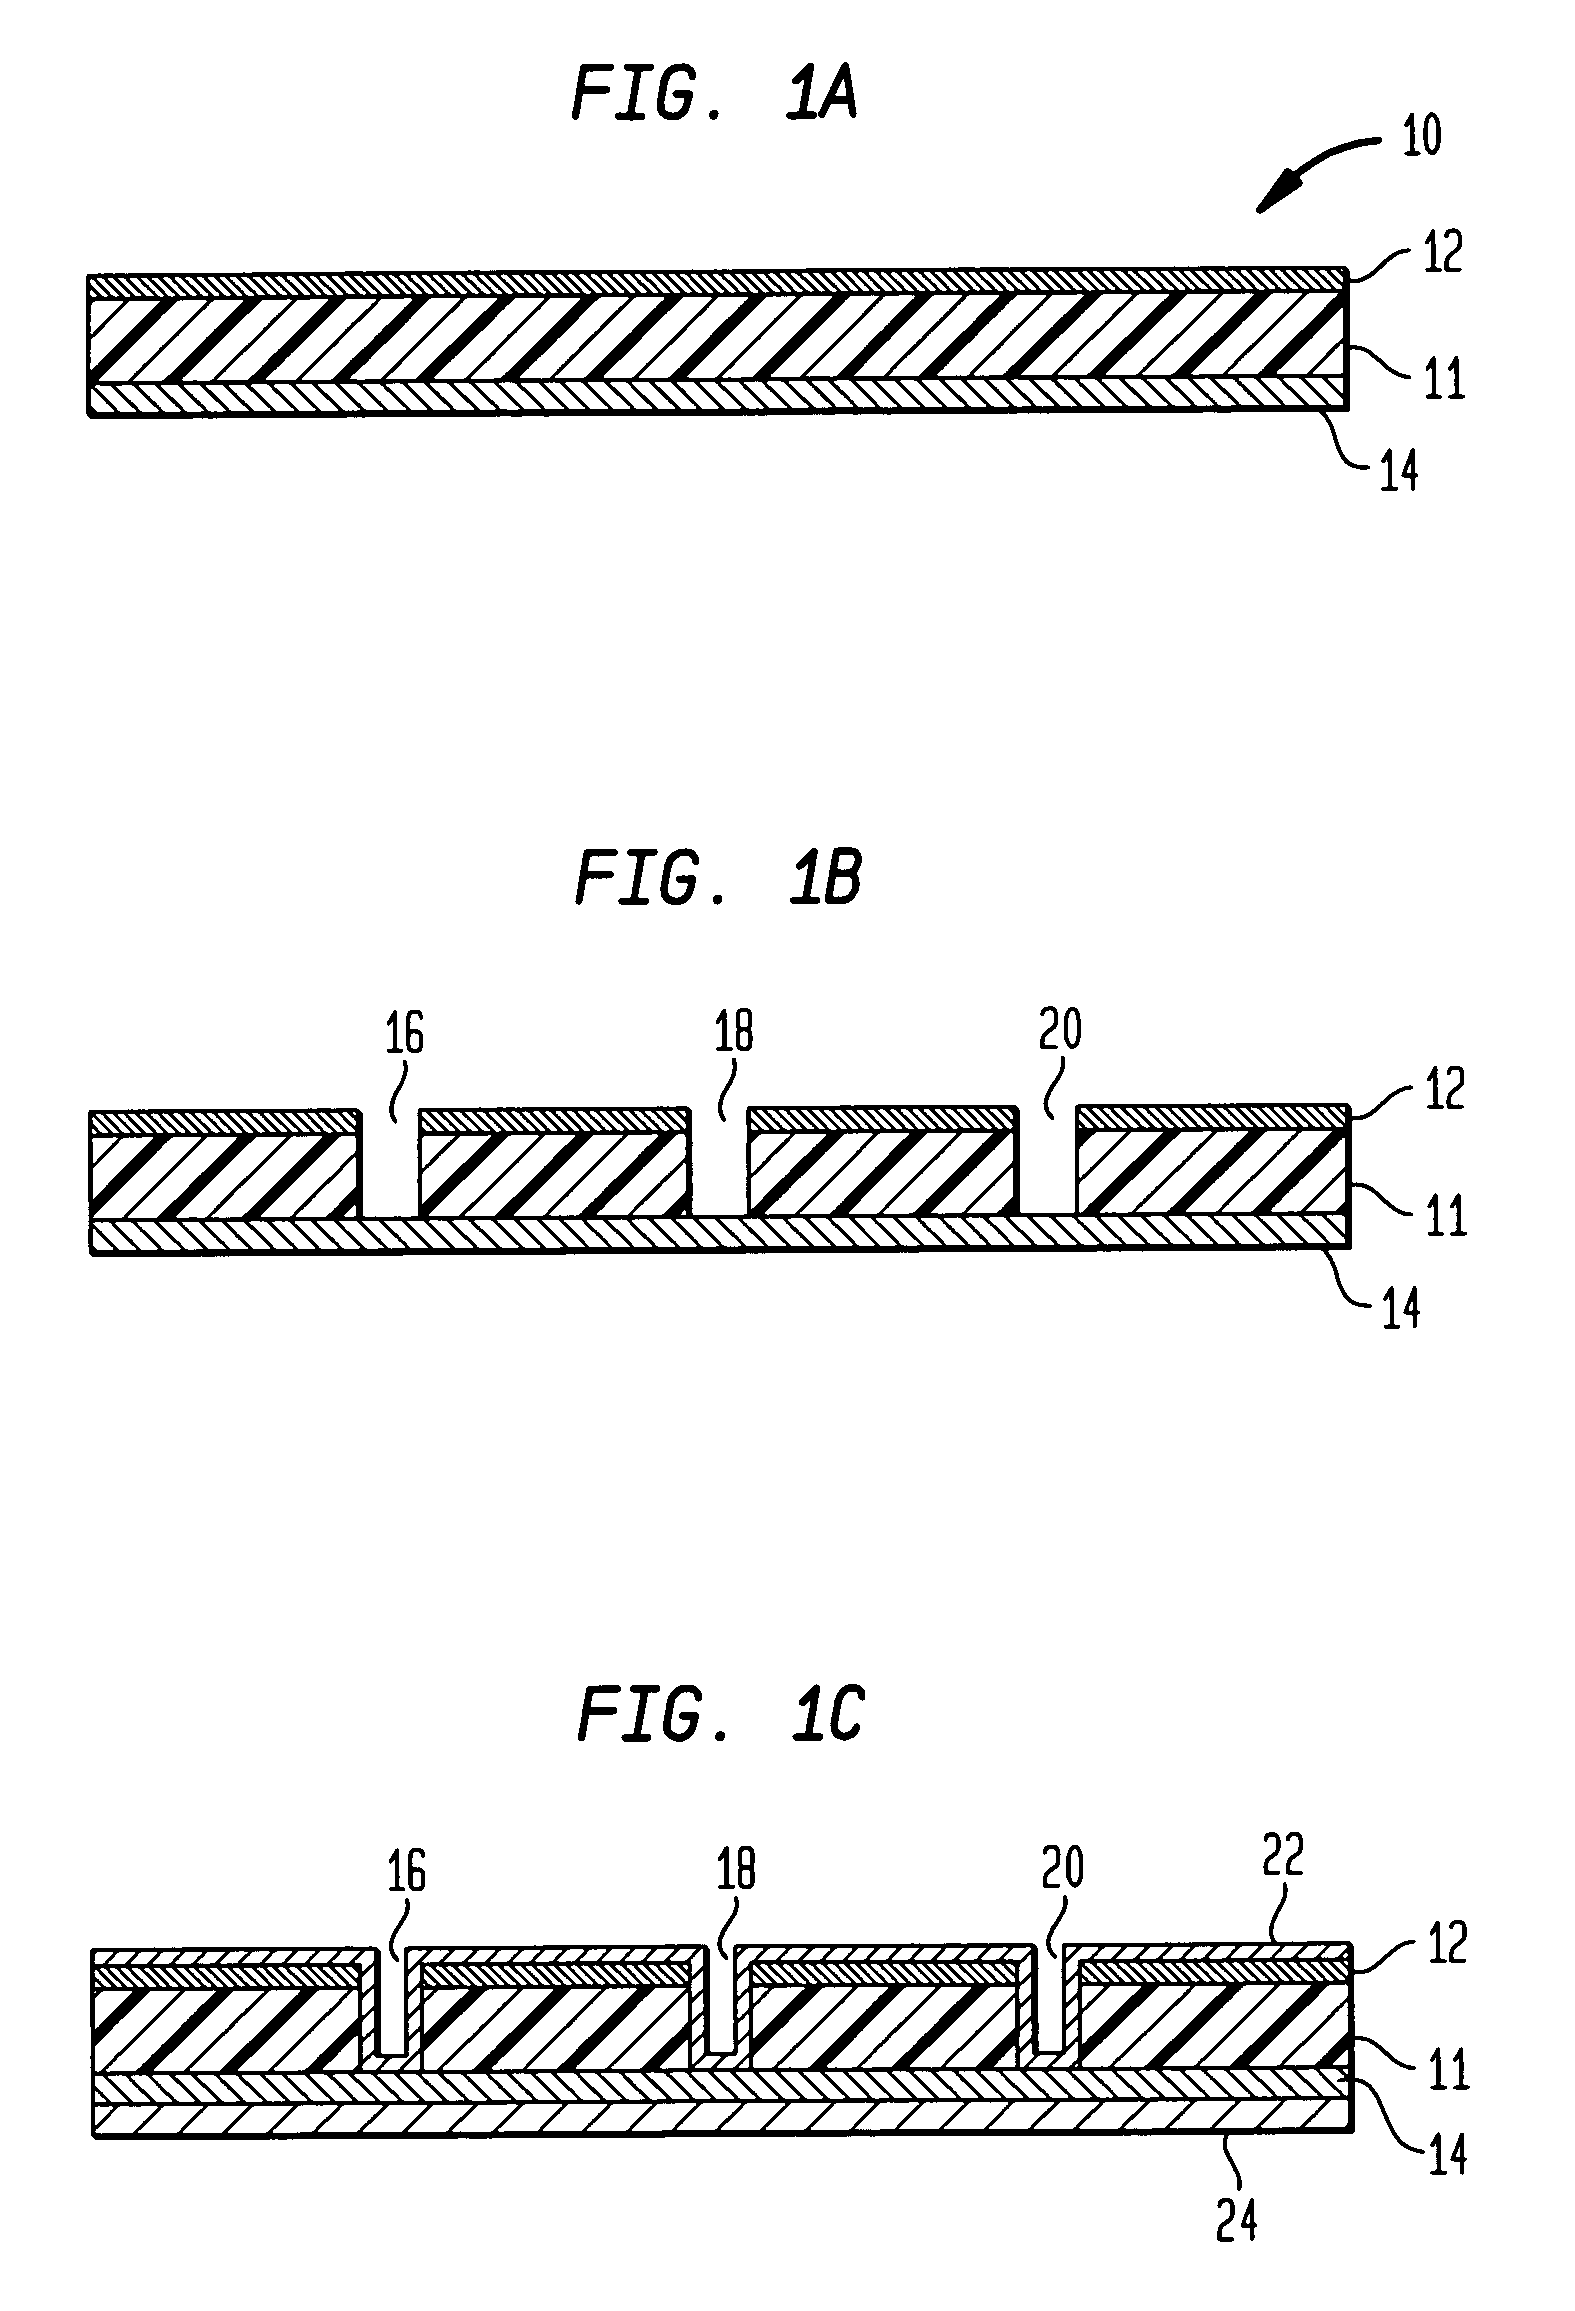 Multi-sheet conductive substrates for microelectronic devices and methods for forming such substrates